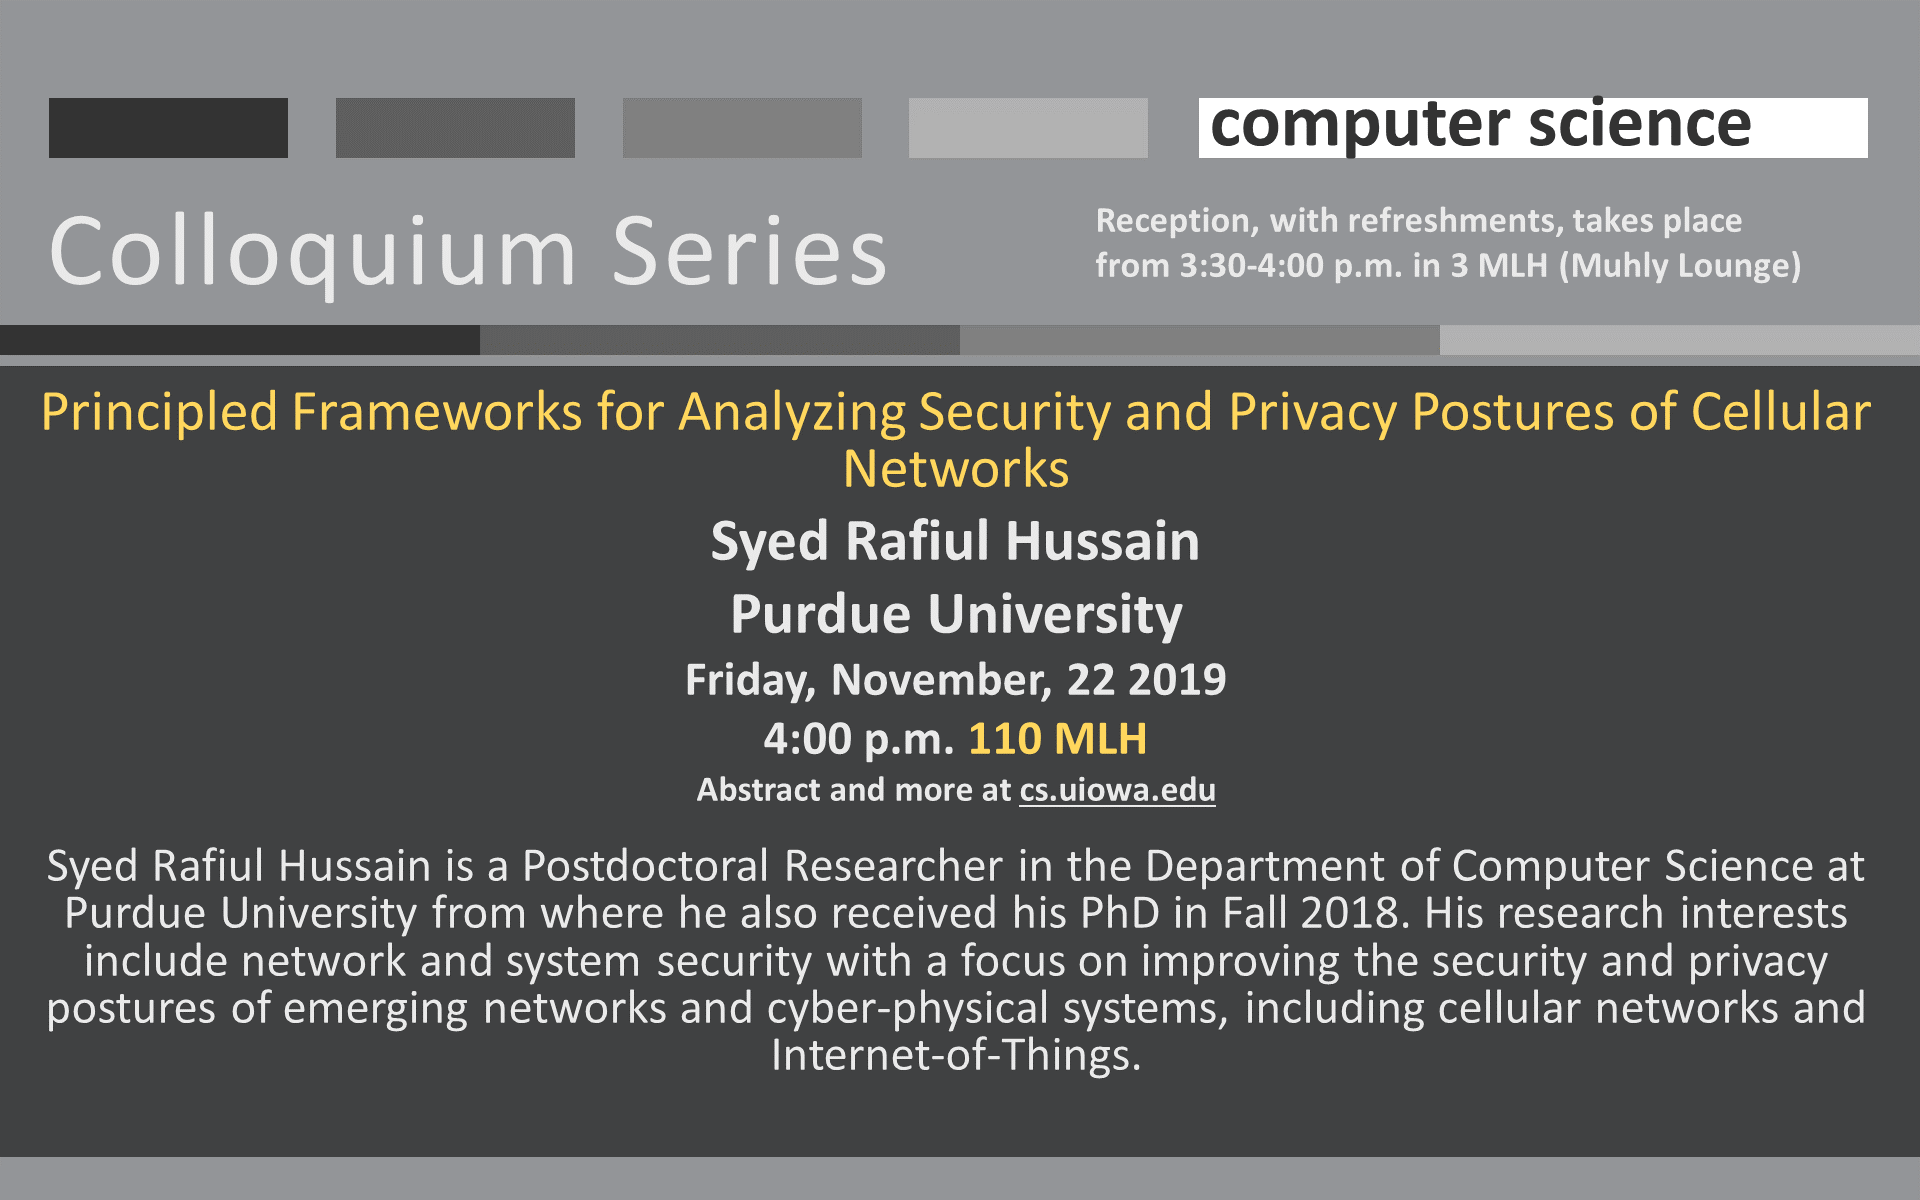 Colloquium Computer Science Principled Frameworks for Analyzing Security and Privacy Postures of Cellular Networks Syed Rafiul Hussain Purdue University Friday, November, 22 2019 4:00 p.m. 110 MLH Abstract and more at cs.uiowa.edu  Syed Rafiul Hussain is a Postdoctoral Researcher in the Department of Computer Science at Purdue University from where he also received his PhD in Fall 2018. His research interests include network and system security with a focus on improving the security and privacy postures of emerging networks and cyber-physical systems, including cellular networks and Internet-of-Things. Reception, with refreshments, takes place from 3:30-4:00 p.m. in 3 MLH (Muhly Lounge)